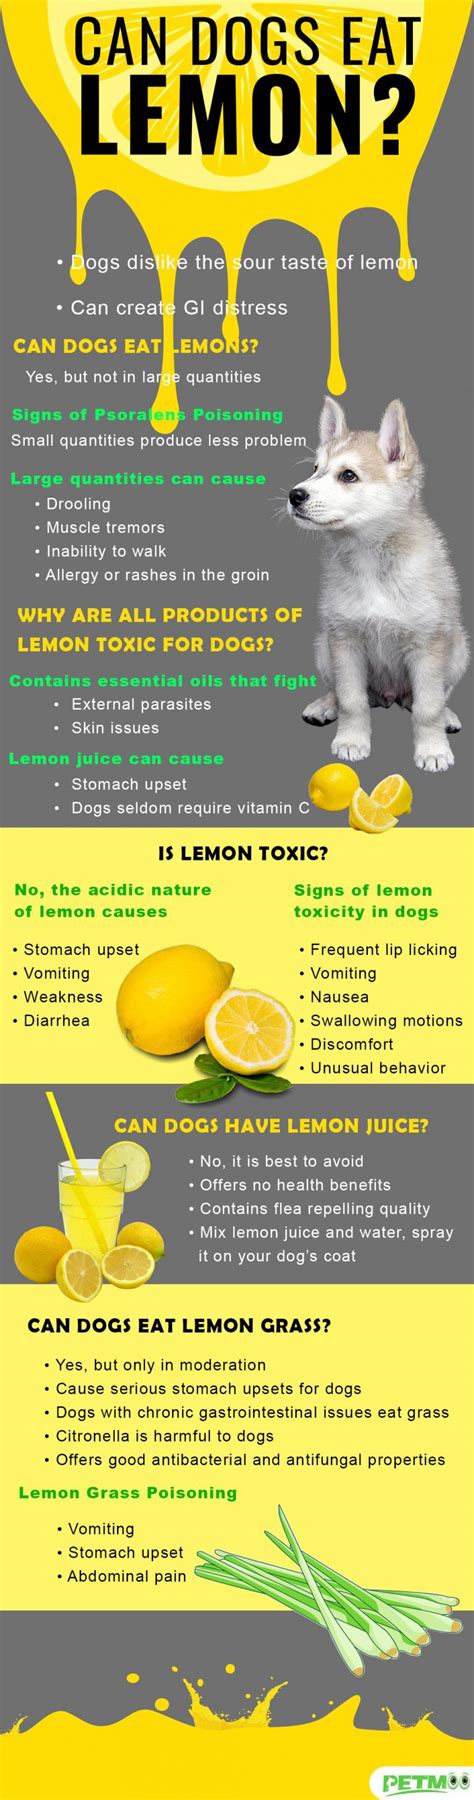  Some dog owners say lemon juice helps